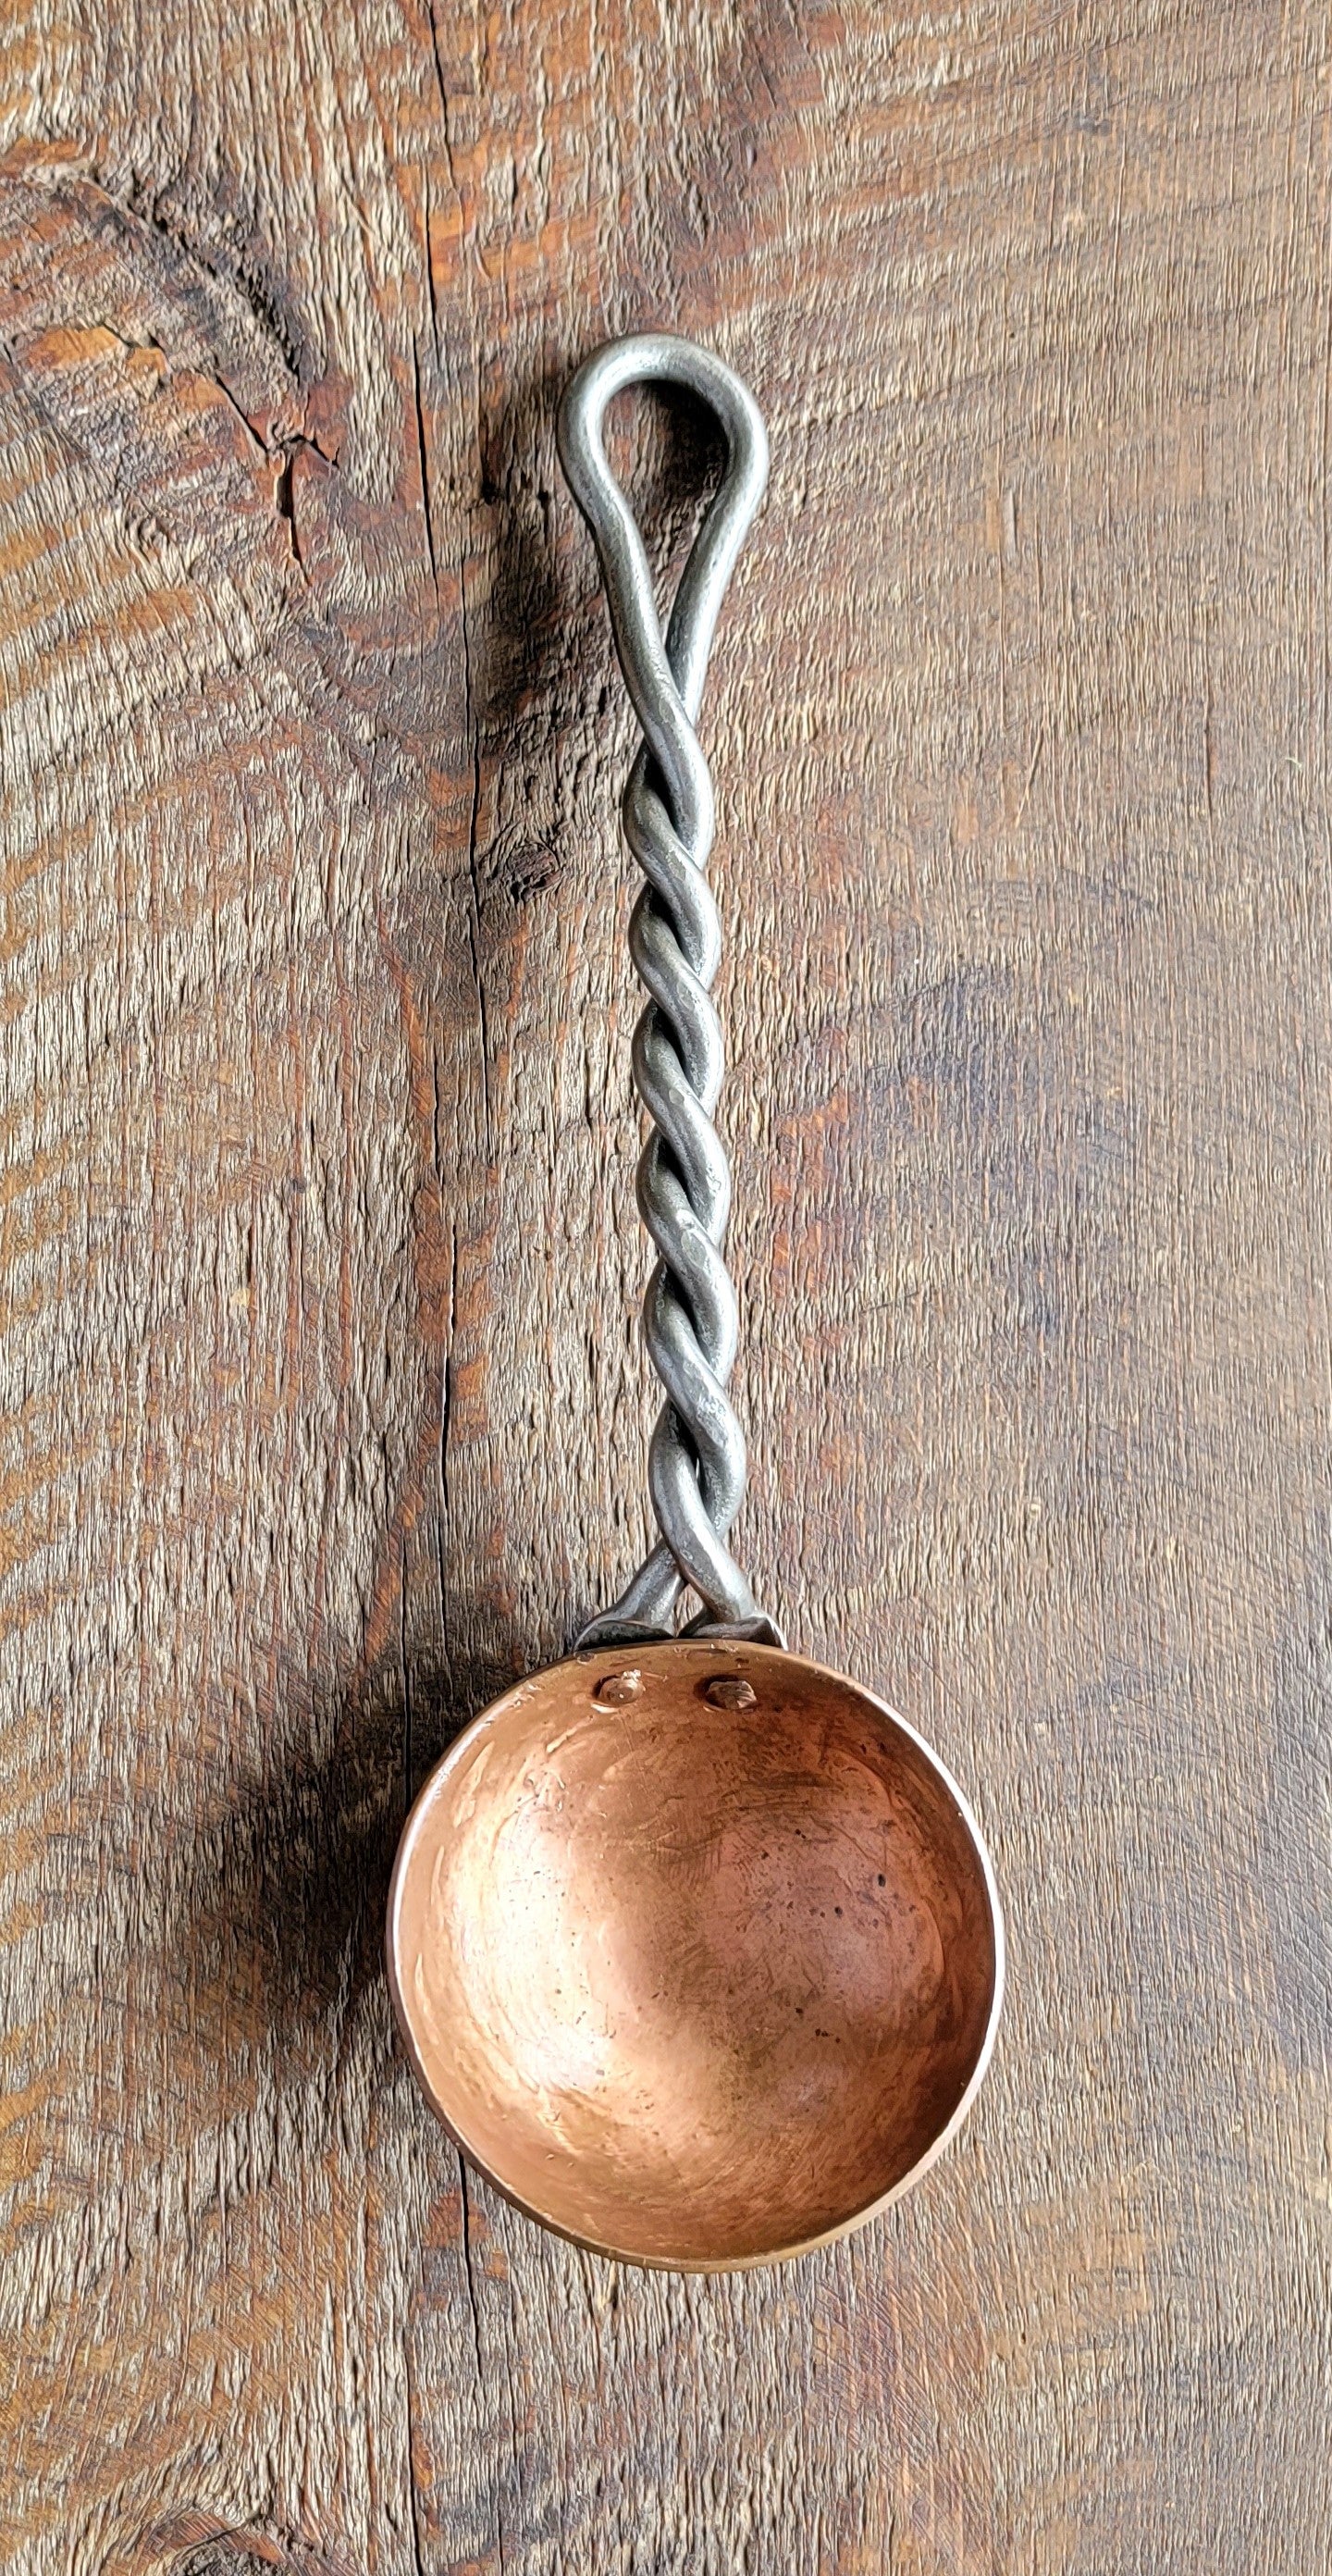 Hand Forged Twisted Iron and Solid Copper Egg Spoon - Small